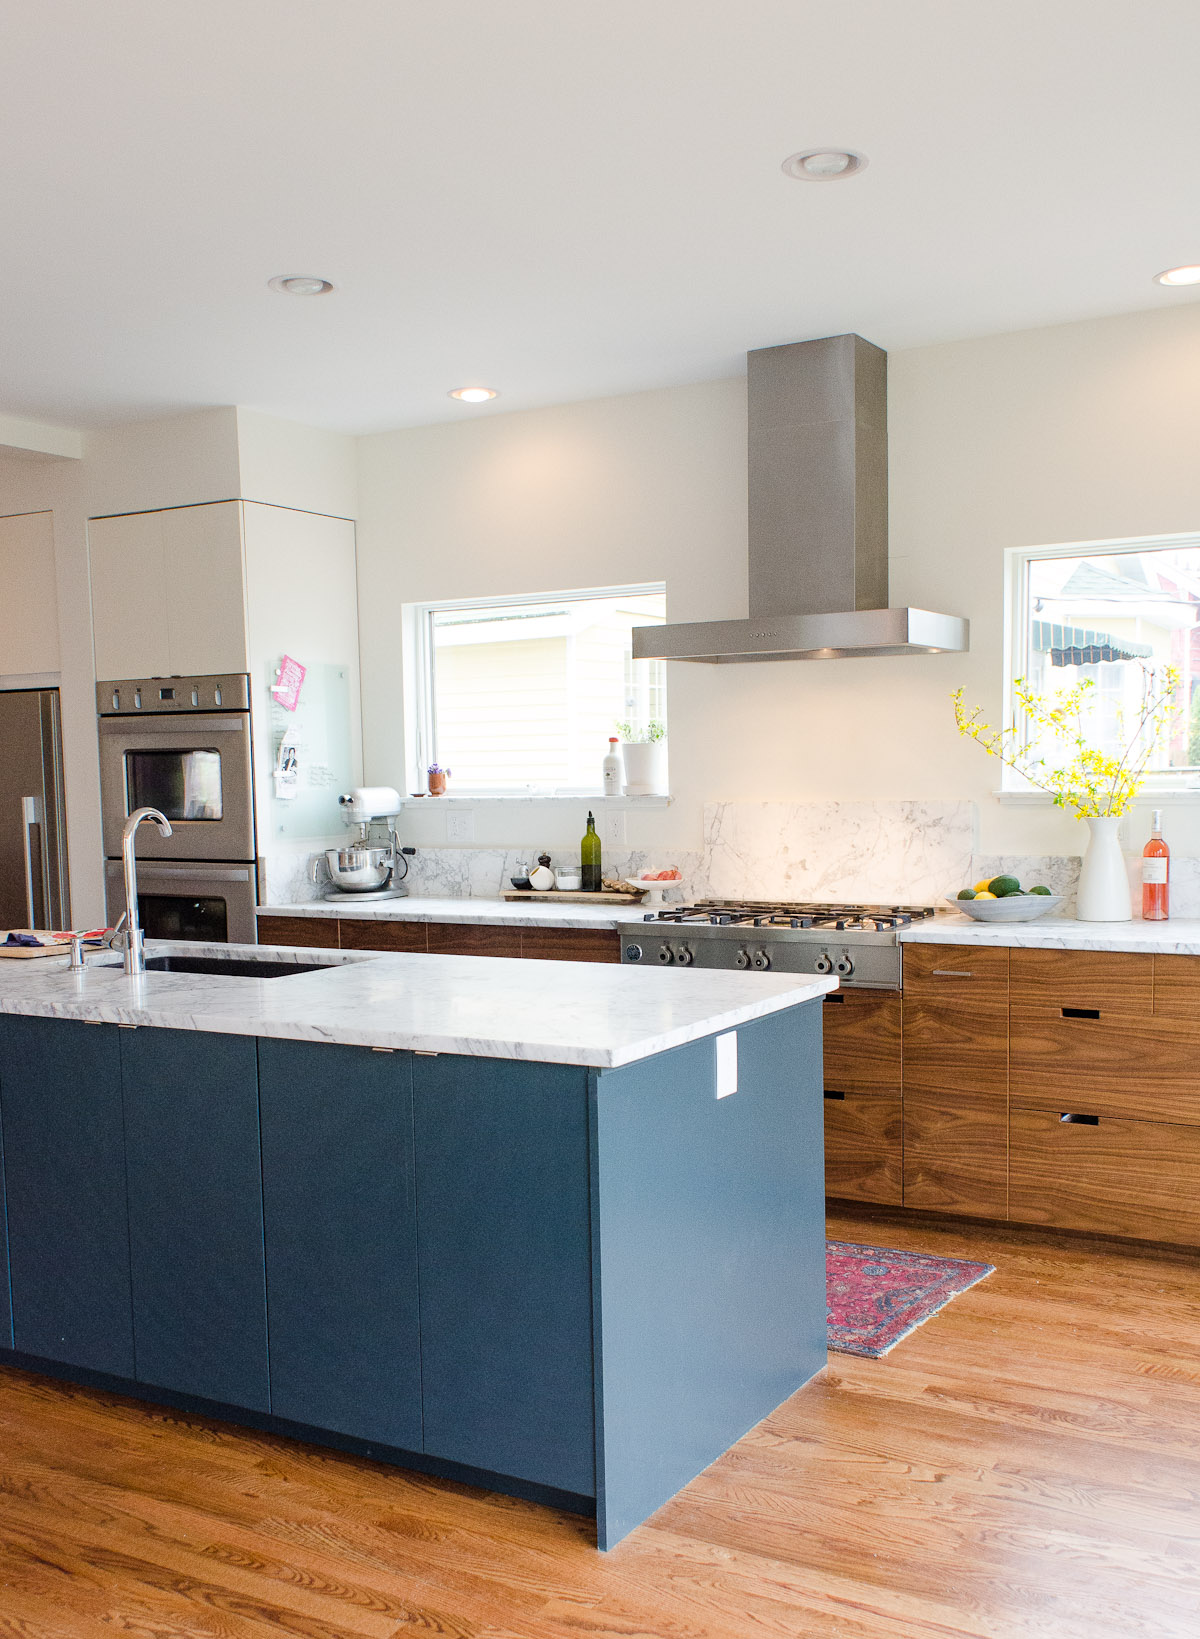 IKEA Kitchen Review - Remodel Cost, Cabinets Quality  Kitchn